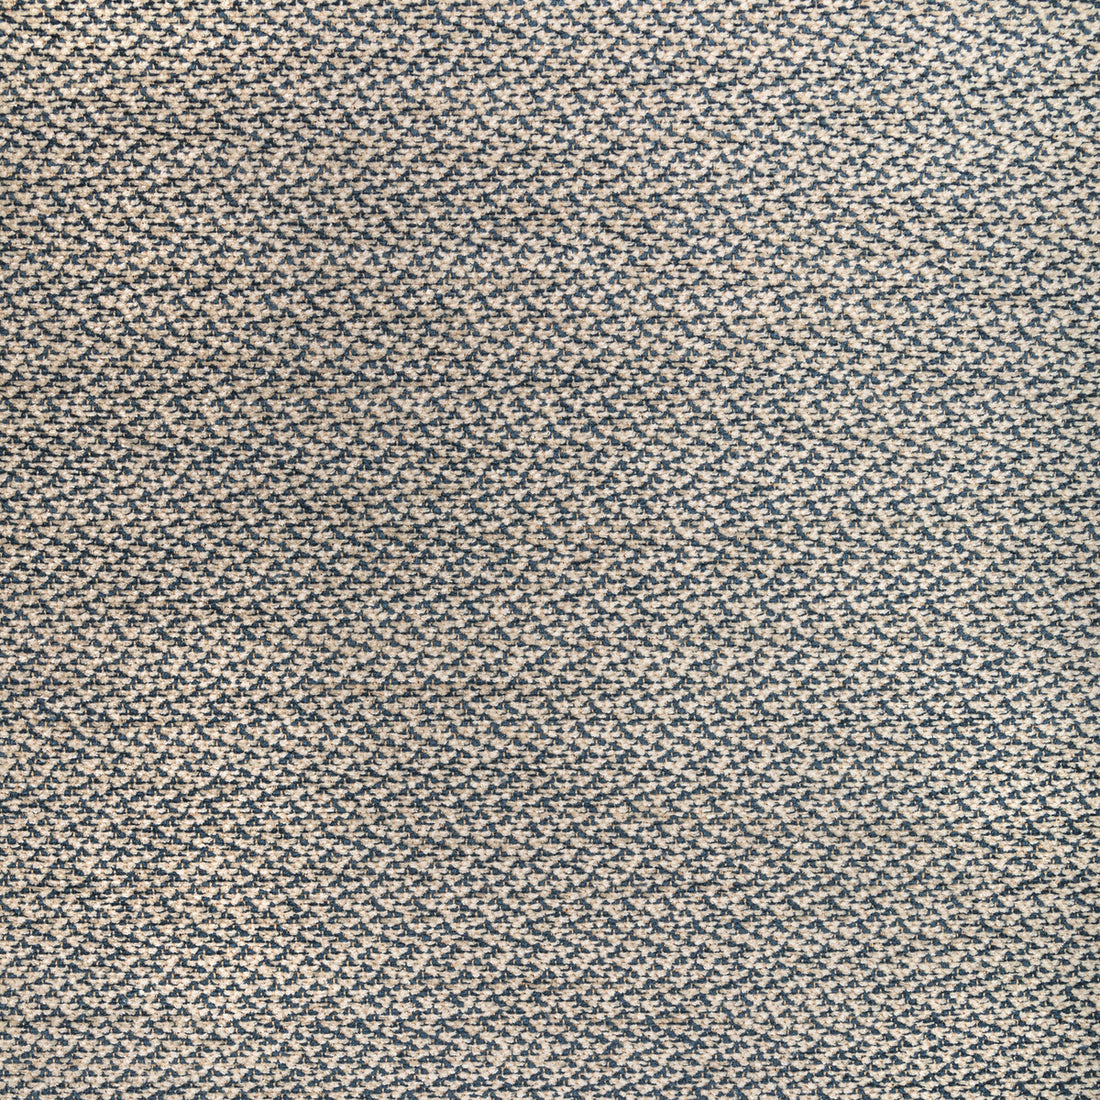 Sasson Texture fabric in denim color - pattern 8022122.55.0 - by Brunschwig &amp; Fils in the Chambery Textures III collection